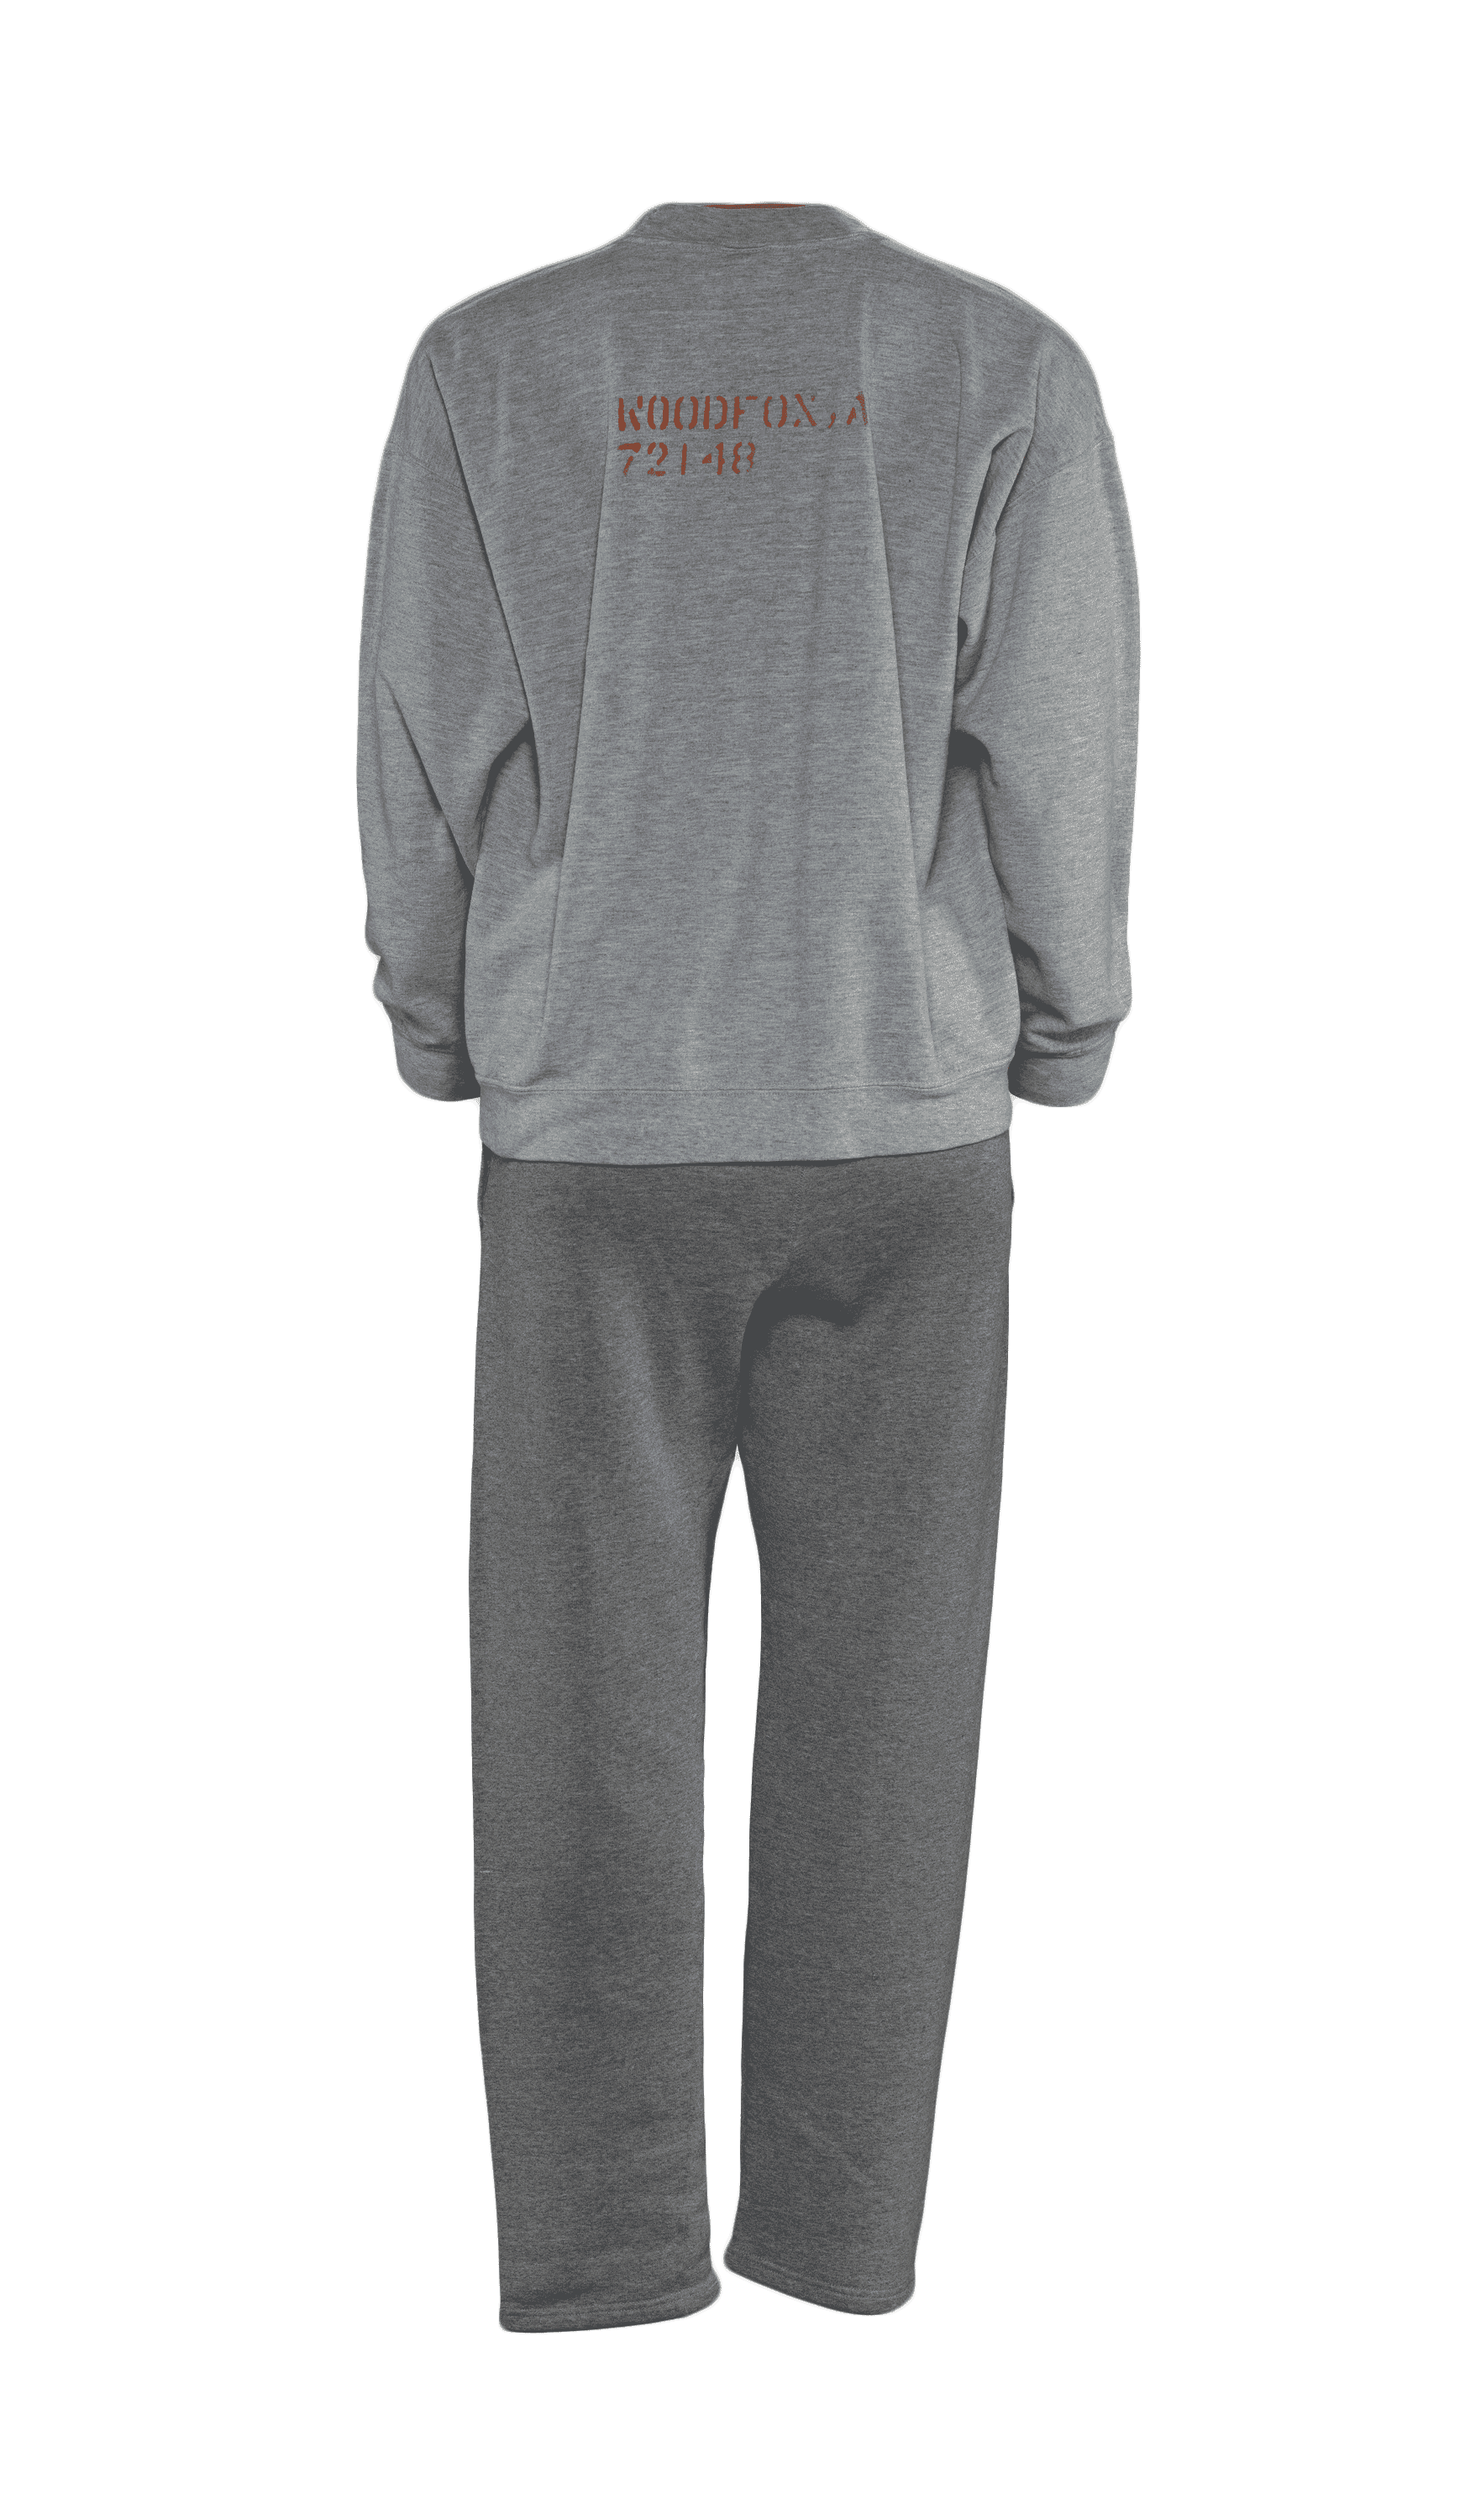 A men's light grey sweatshirt and dark gray sweats. The sweatshirt has a faded inmate number on the back.